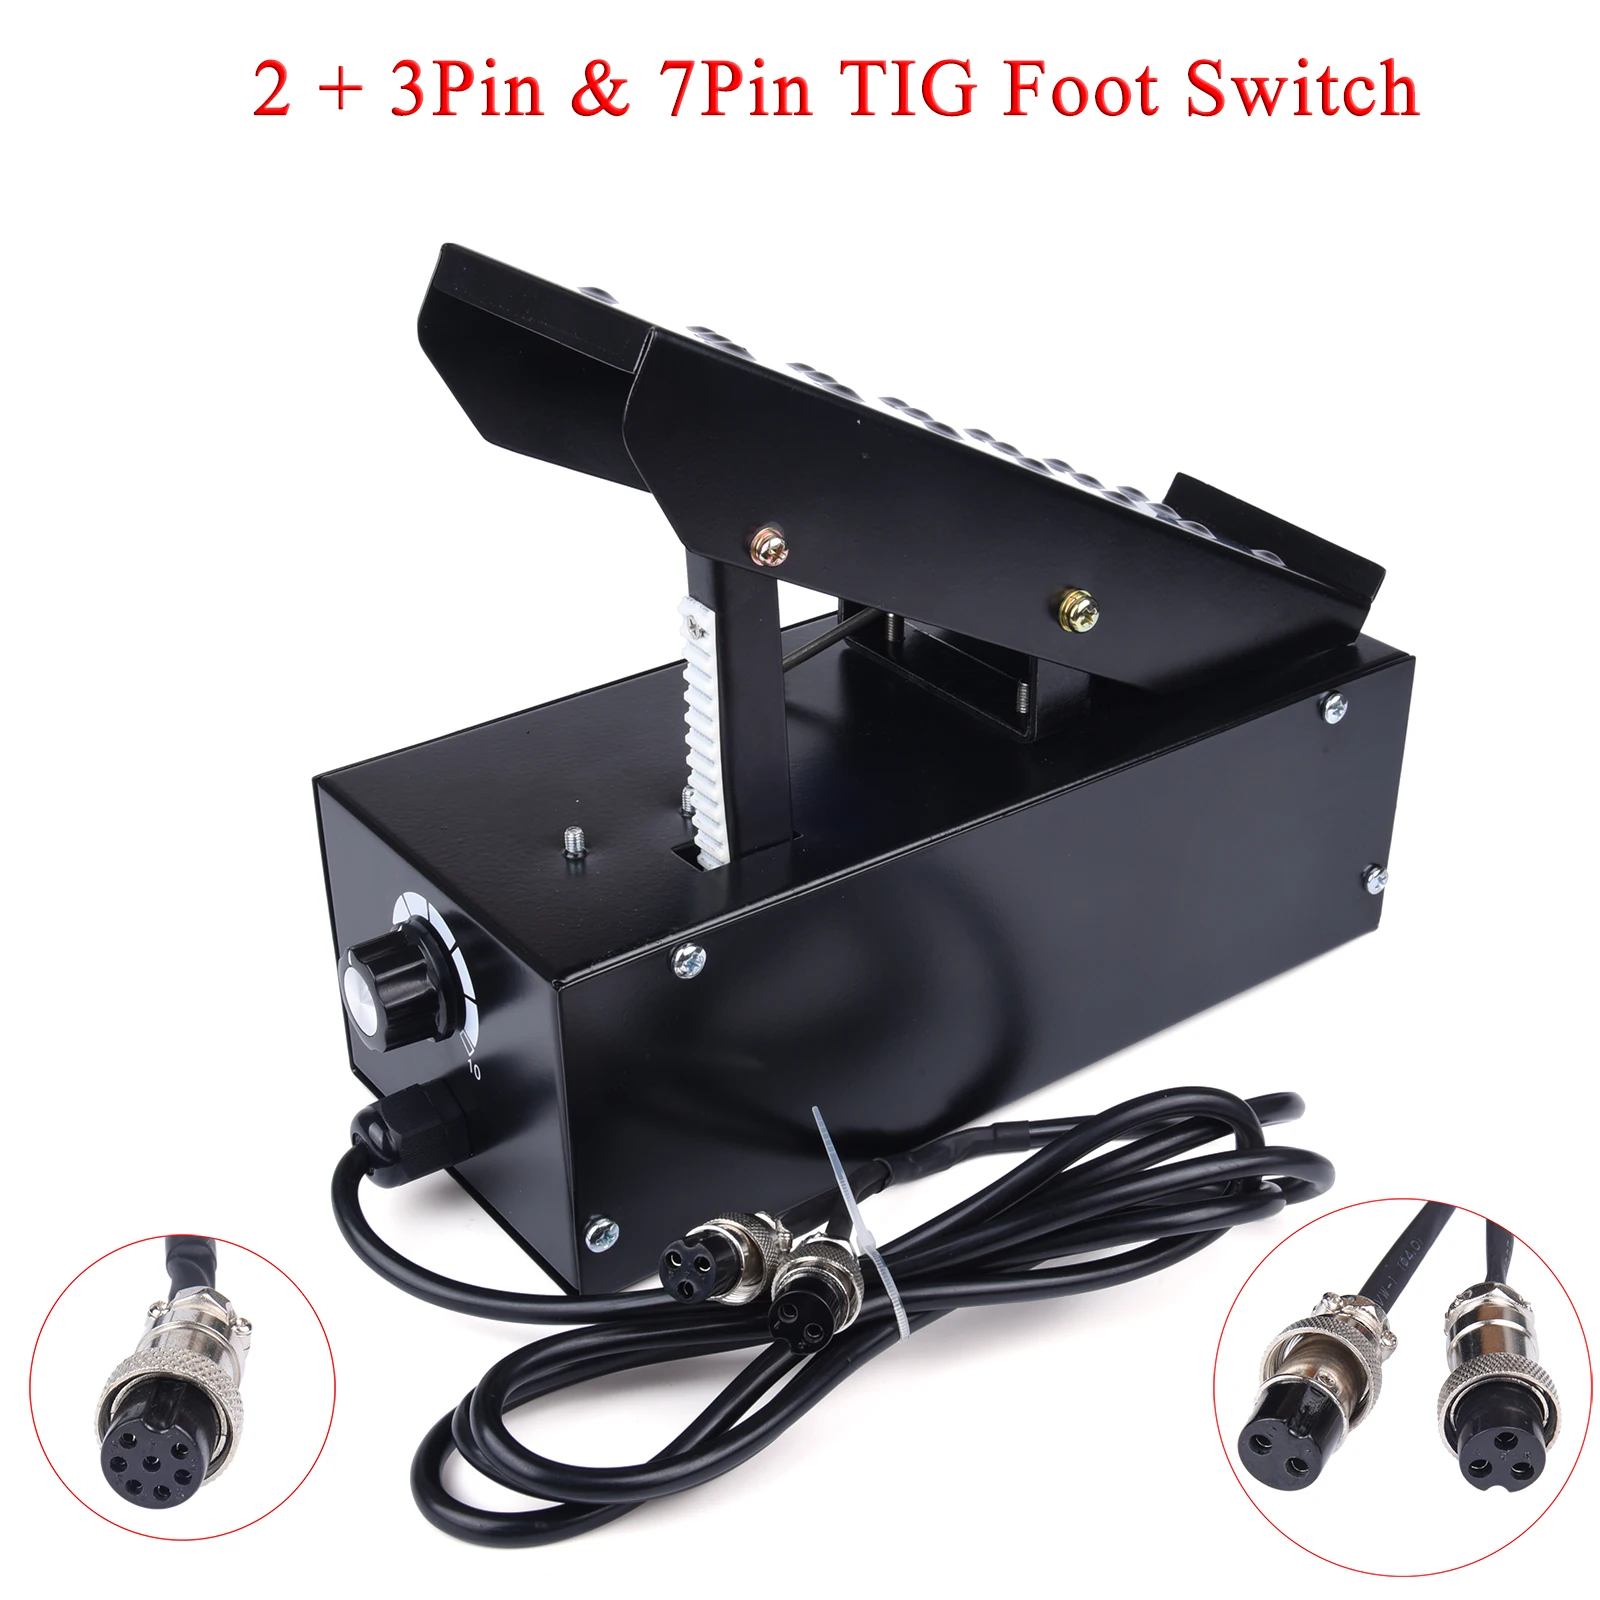 2+3/7 Pins Foot Pedal Power Amperage Controller Current Stepless Adjustable Switch For TIG ATGW Spot Weldding IGBT Machine